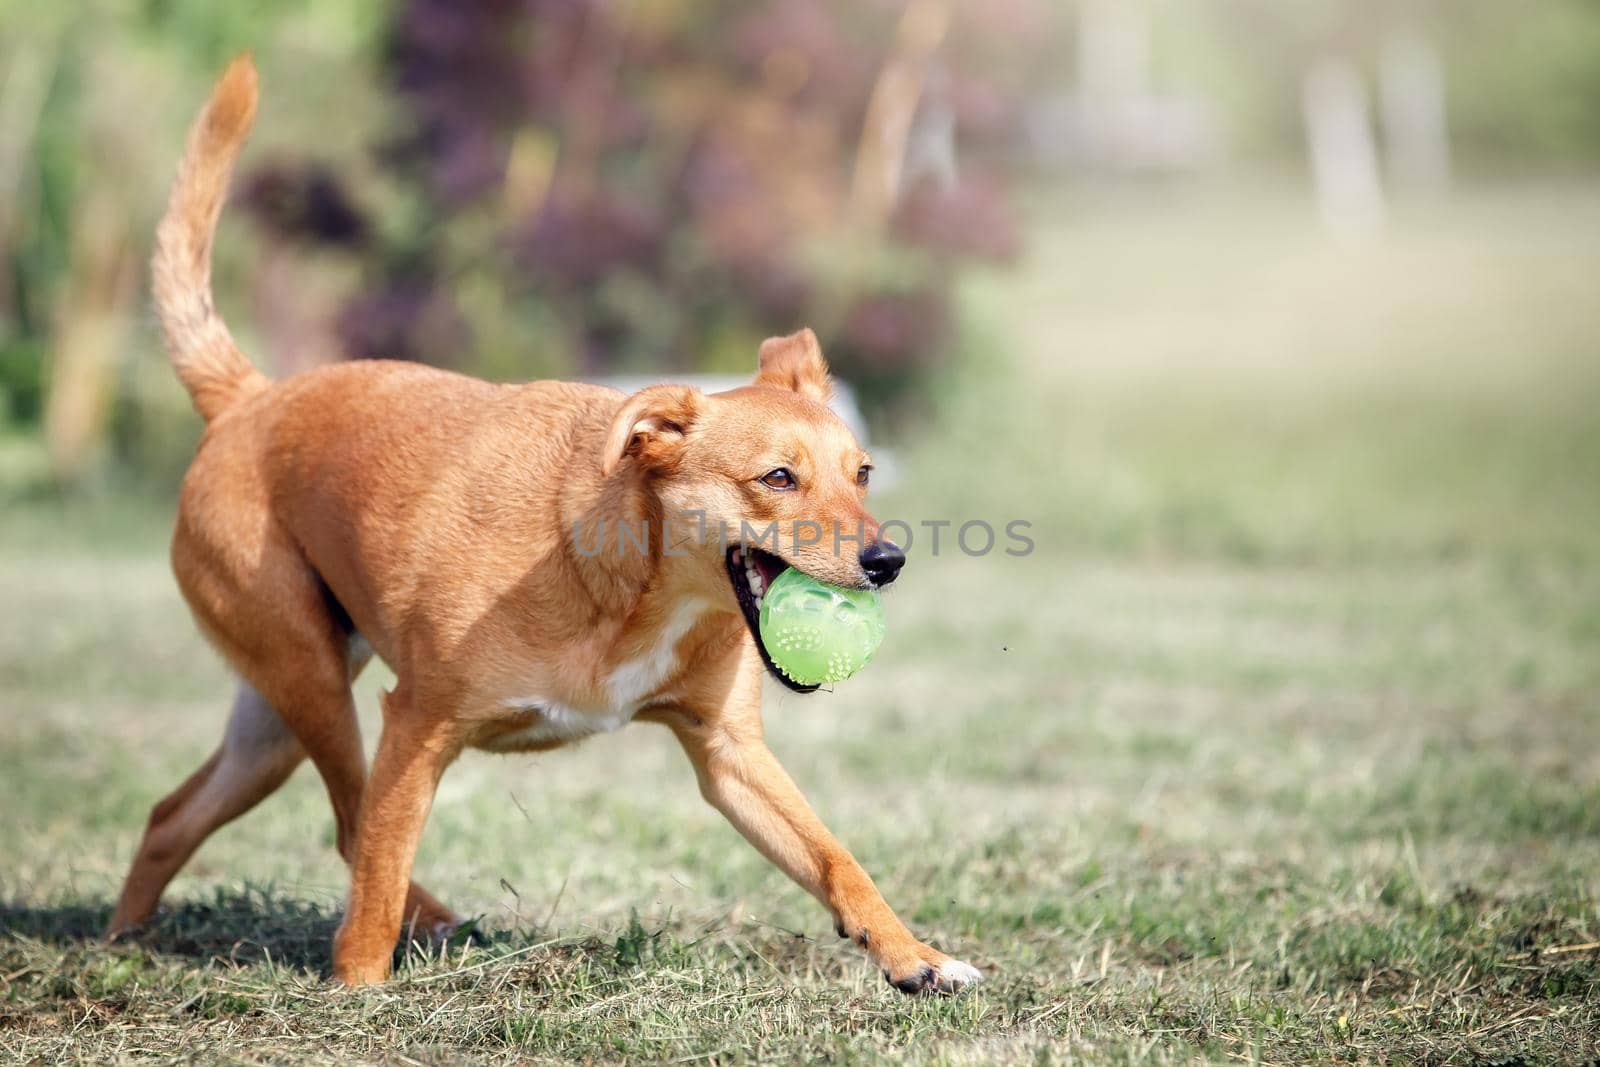 An orange dog, like a fox steals a green toy and escapes. Concept: pets love, happy pet